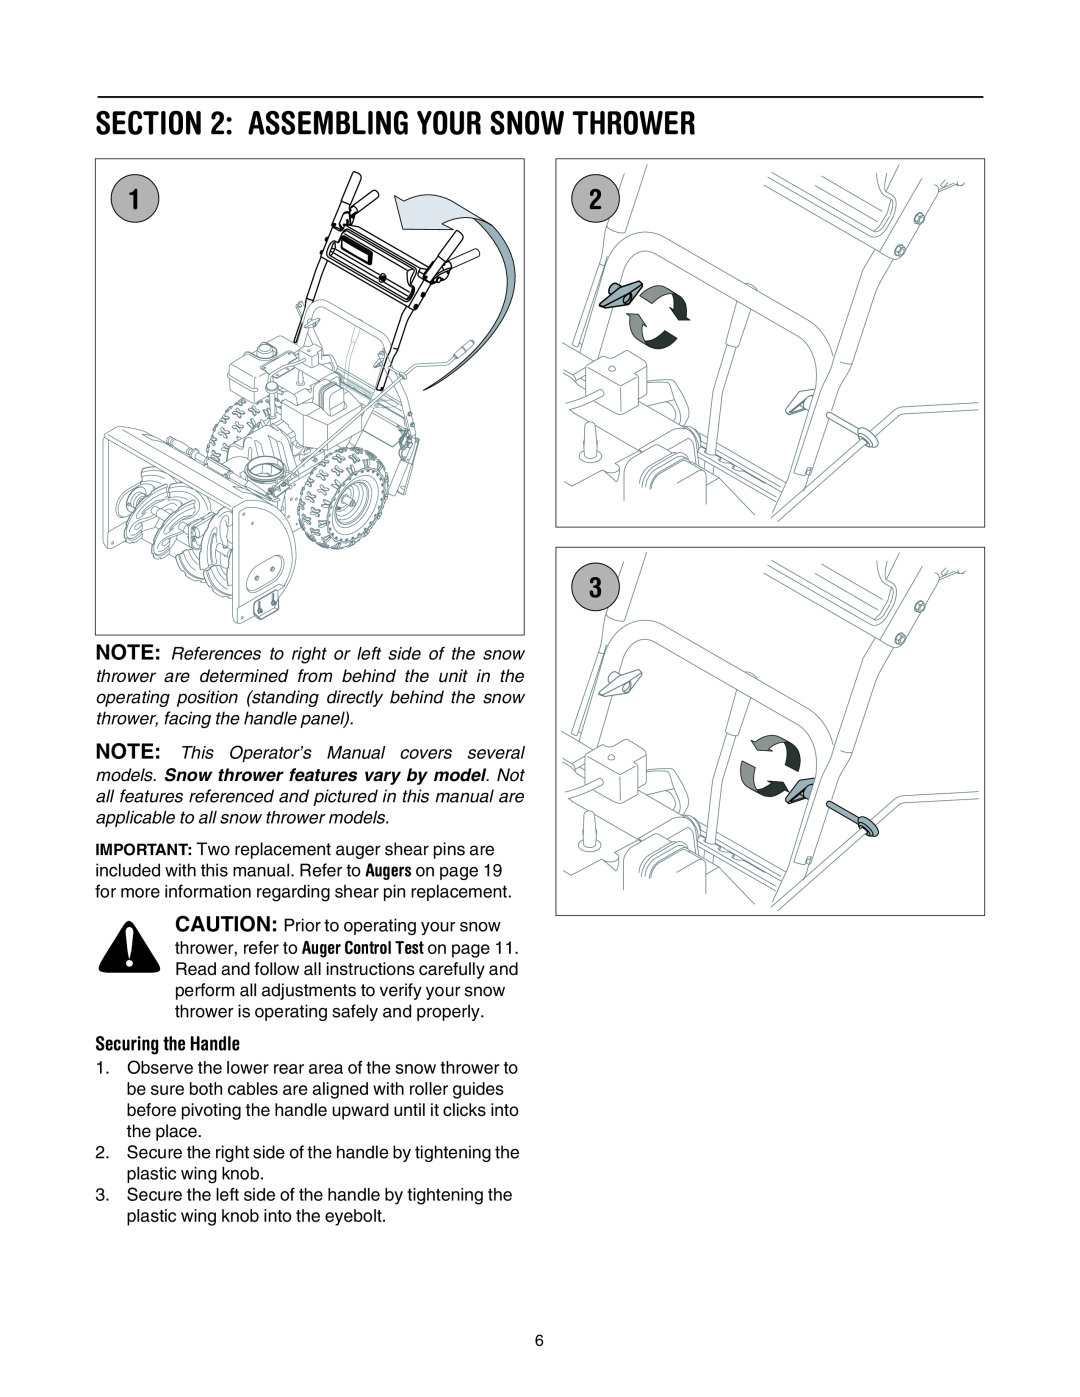 MTD 6DE manual Assembling Your Snow Thrower, Securing the Handle 